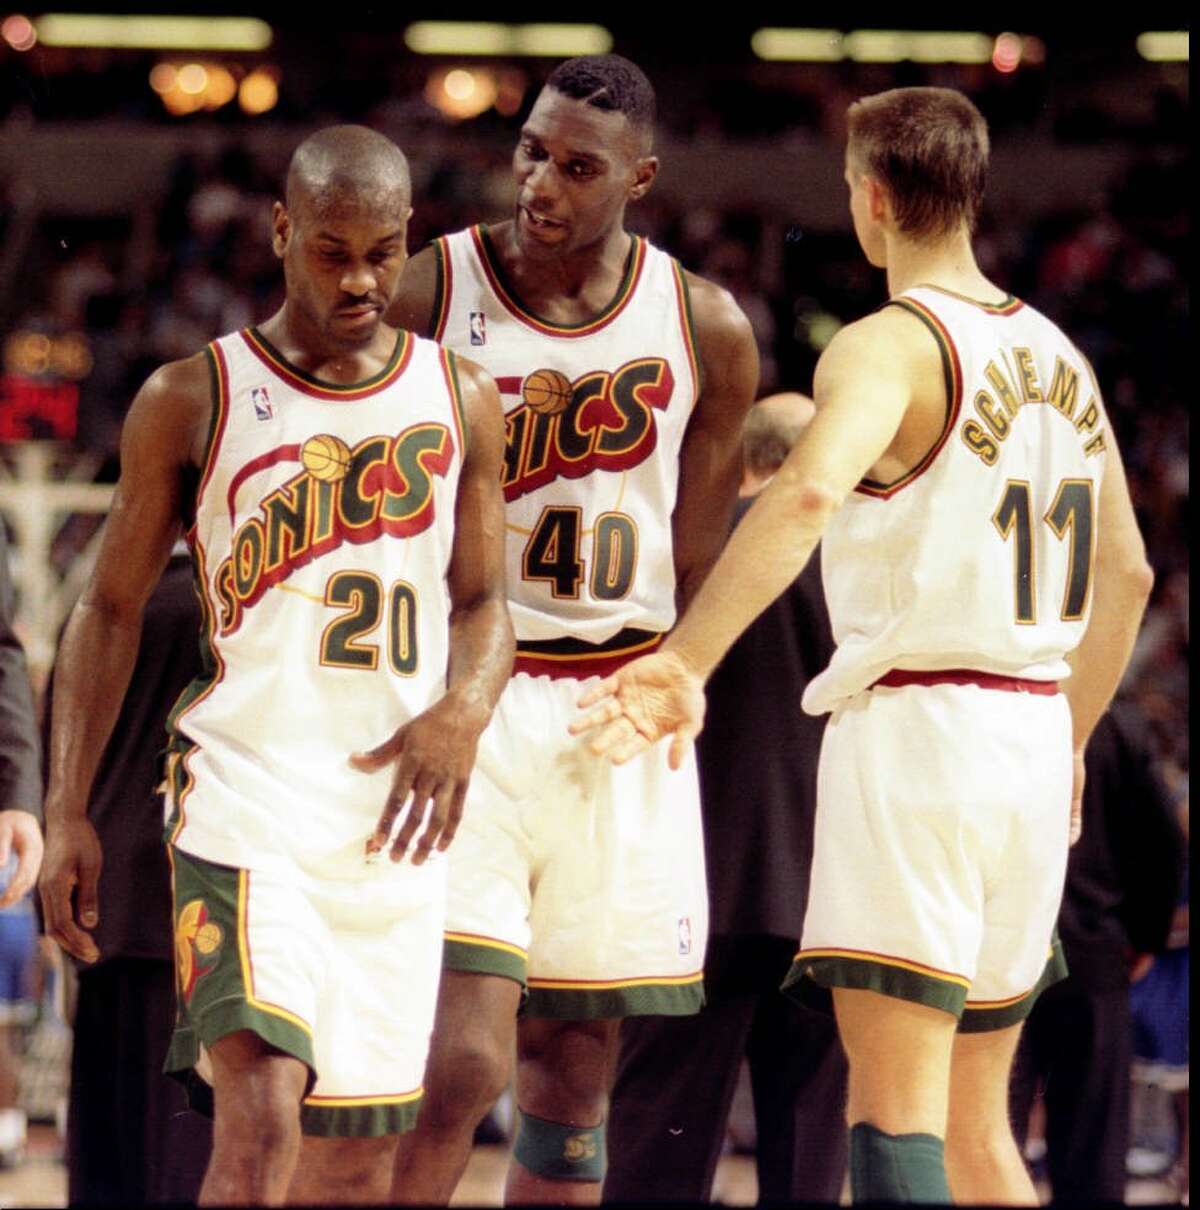 After being kicked out of a 1996 game for head-butting the Orlando's Joe Wolf, Gary Payton is encouraged by Shawn Kemp (40) and Detlef Schrempf (11) as he leaves the court. The three were core members of head coach George Karl's Sonics teams.